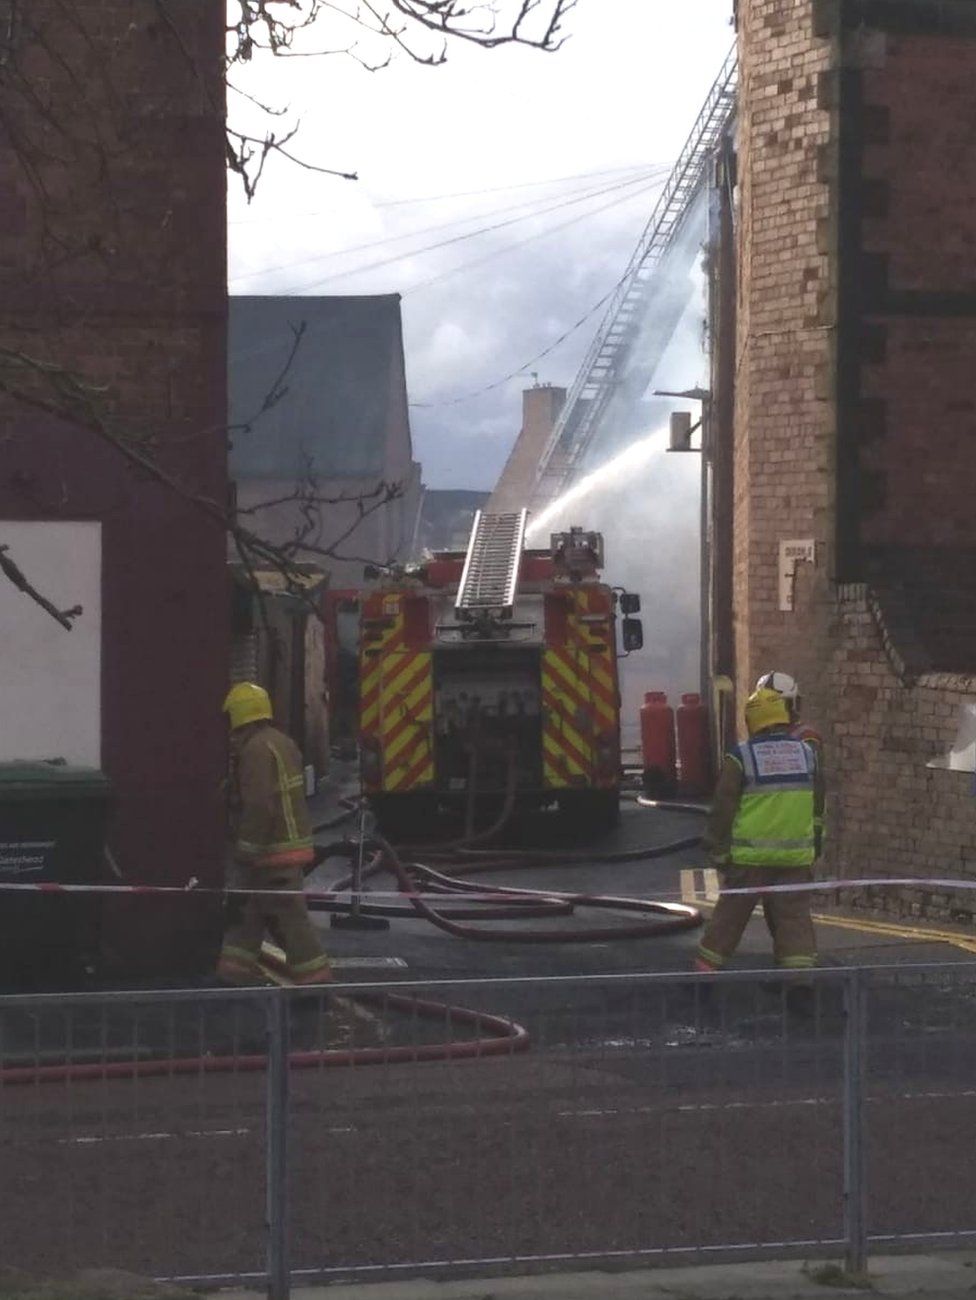 Firefighters tackling fire in Gateshead